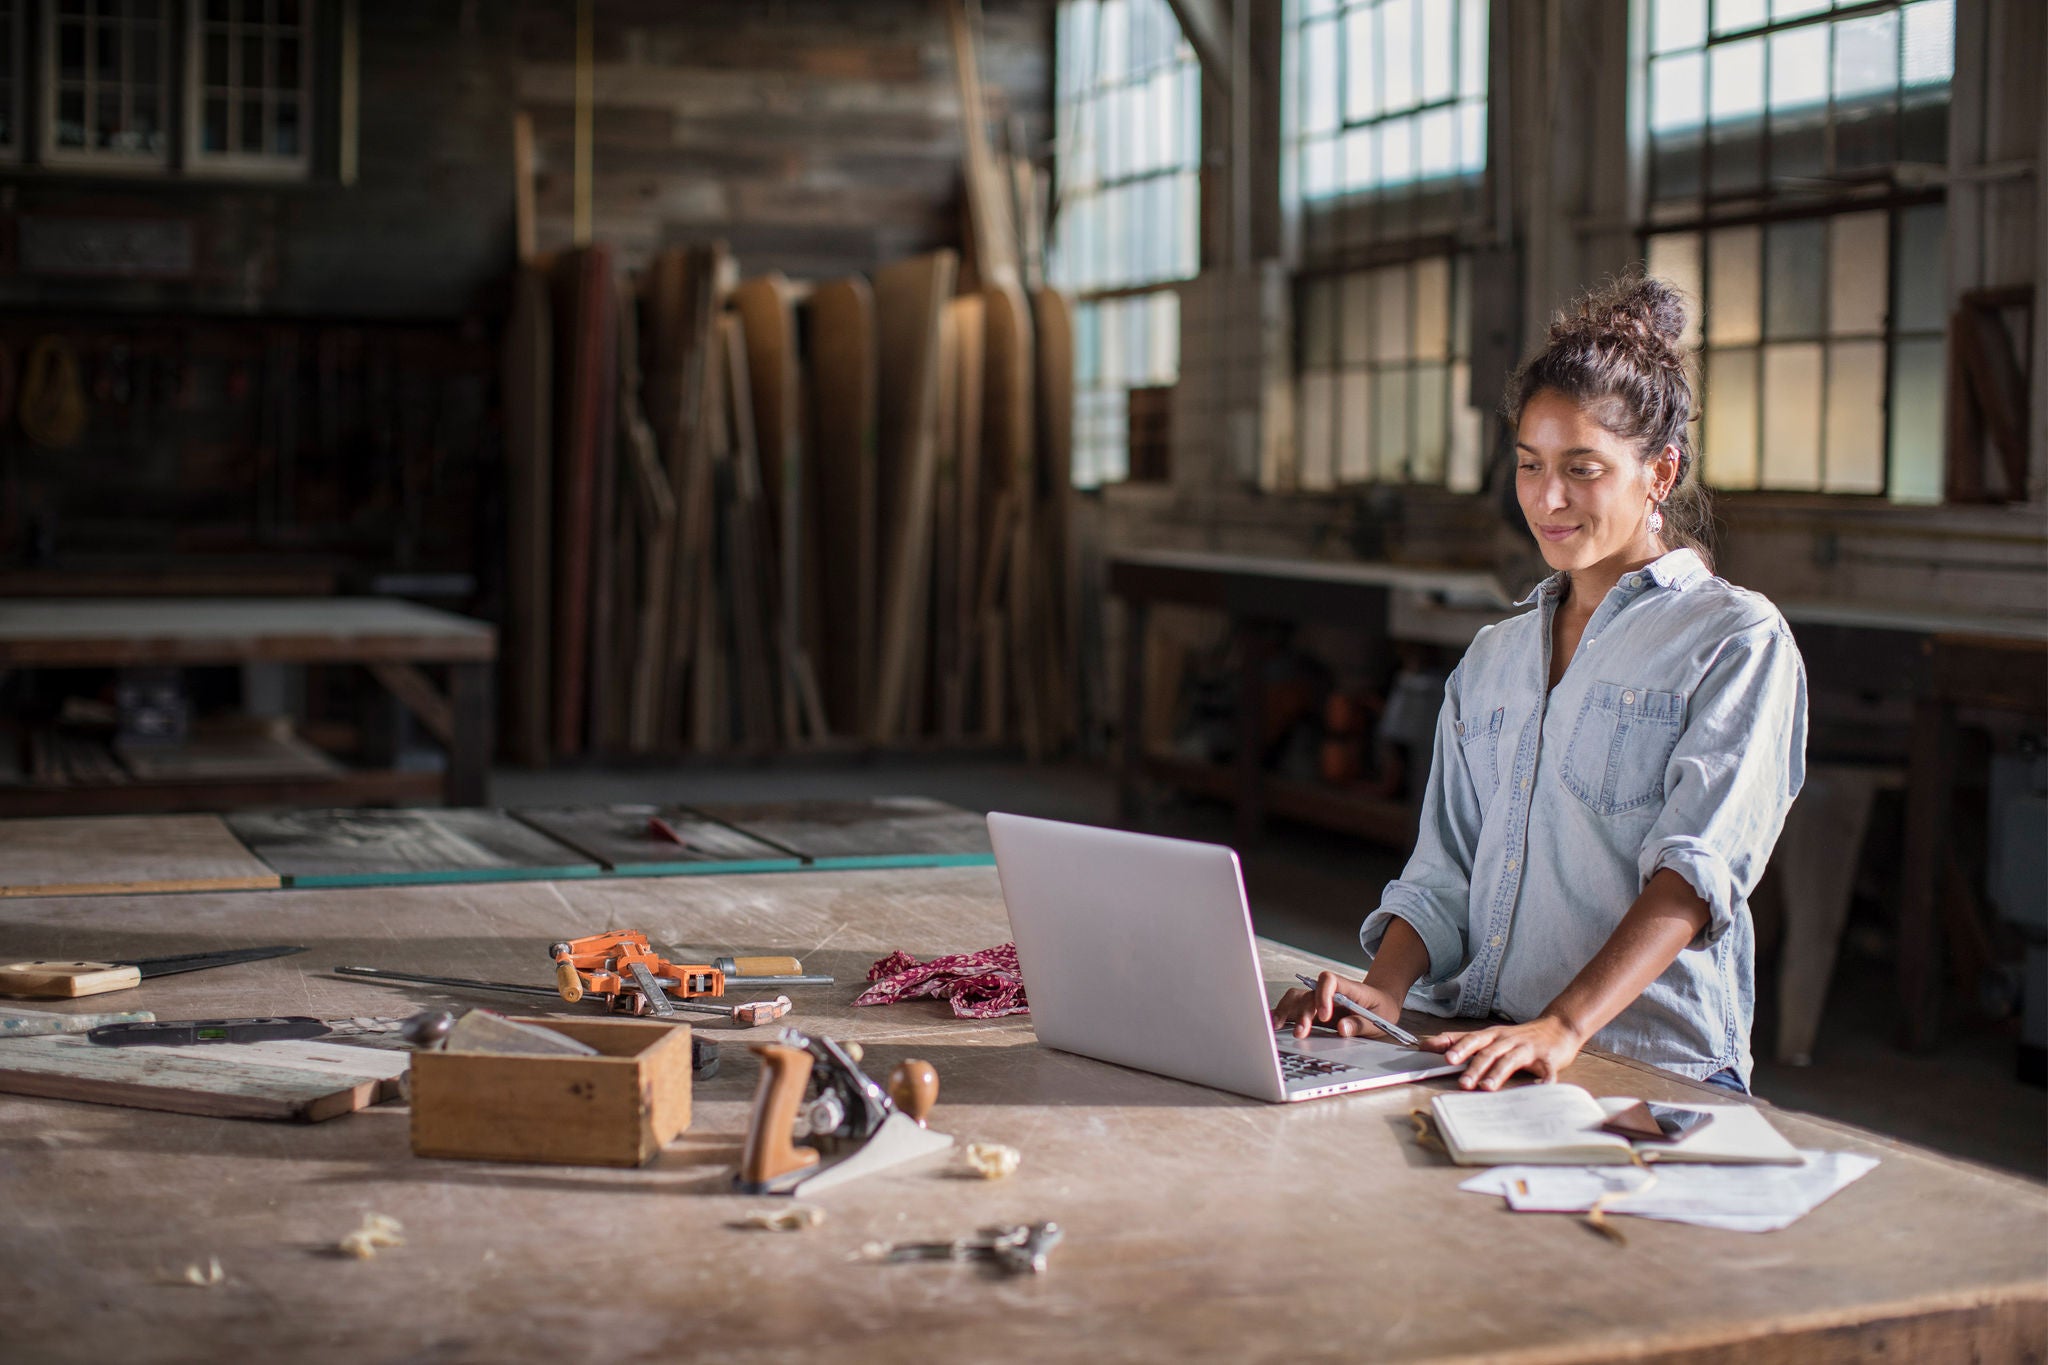 Young Mixed Race Female Entrepreneur Solving a Complicated Business Challenge with Pencil, Laptop, Carpentry Tools, and Confidence. Young mixed race woman stands at her sturdy wooden worktable, strewn with carpentry tools, sawdust, paper, and other creative mayhem. She's using a laptop and also has a smartphone on the tabletop. Innovation is evident in her confident calm posture and the sparks of discovery/innovation lighting up her half-smiling face. In the background, natural light of the spacious, lofty maker space illuminates raw lumber and other woodworking tools in soft focus.